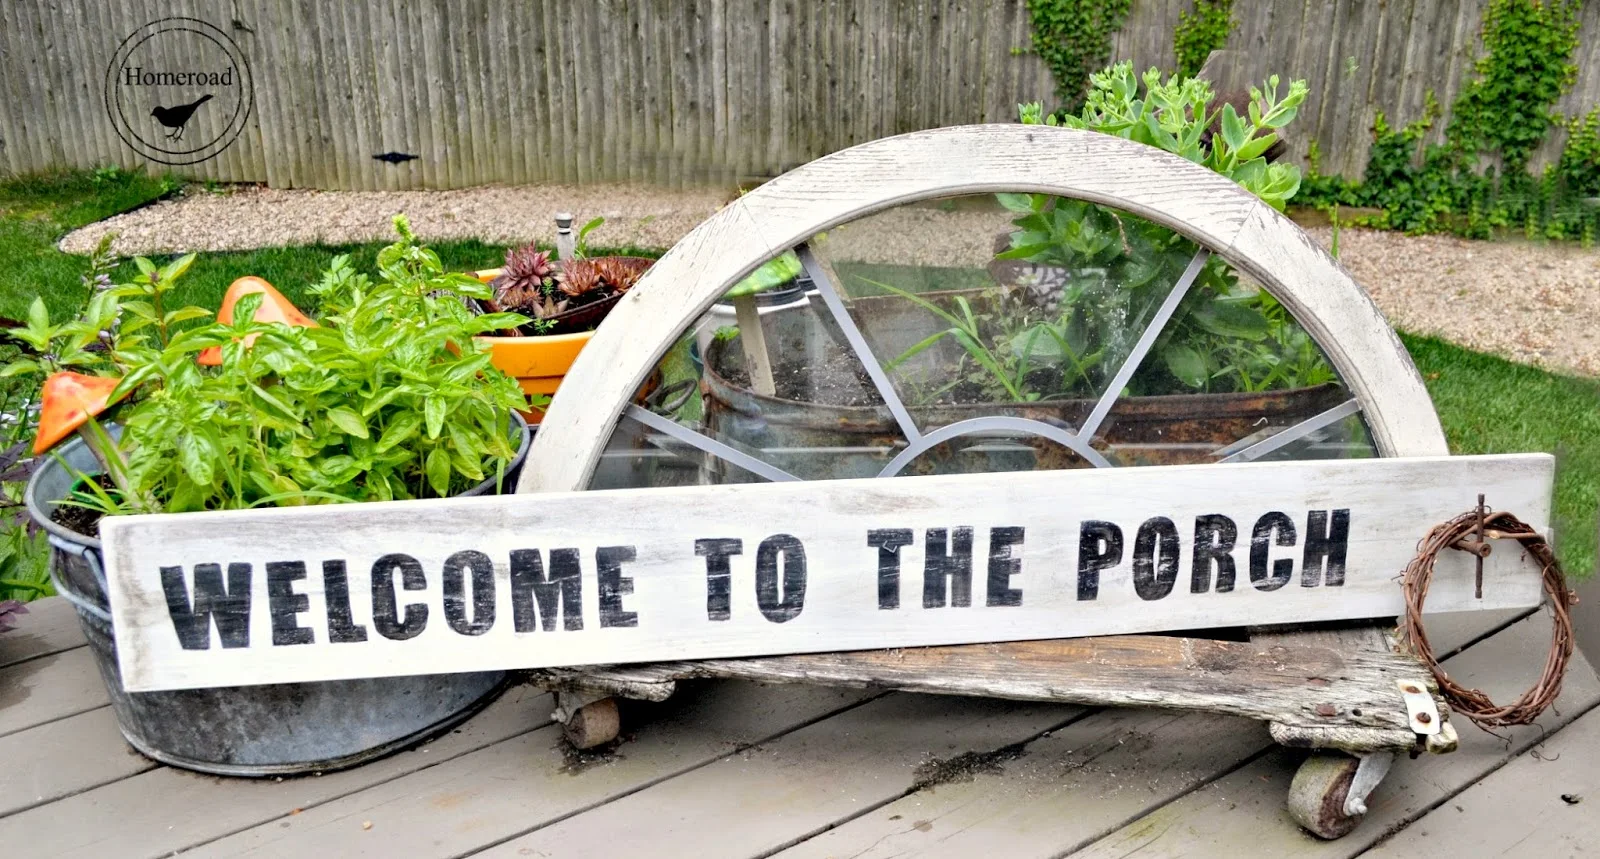 welcome-to-the-porch-sign www.homeroad.net